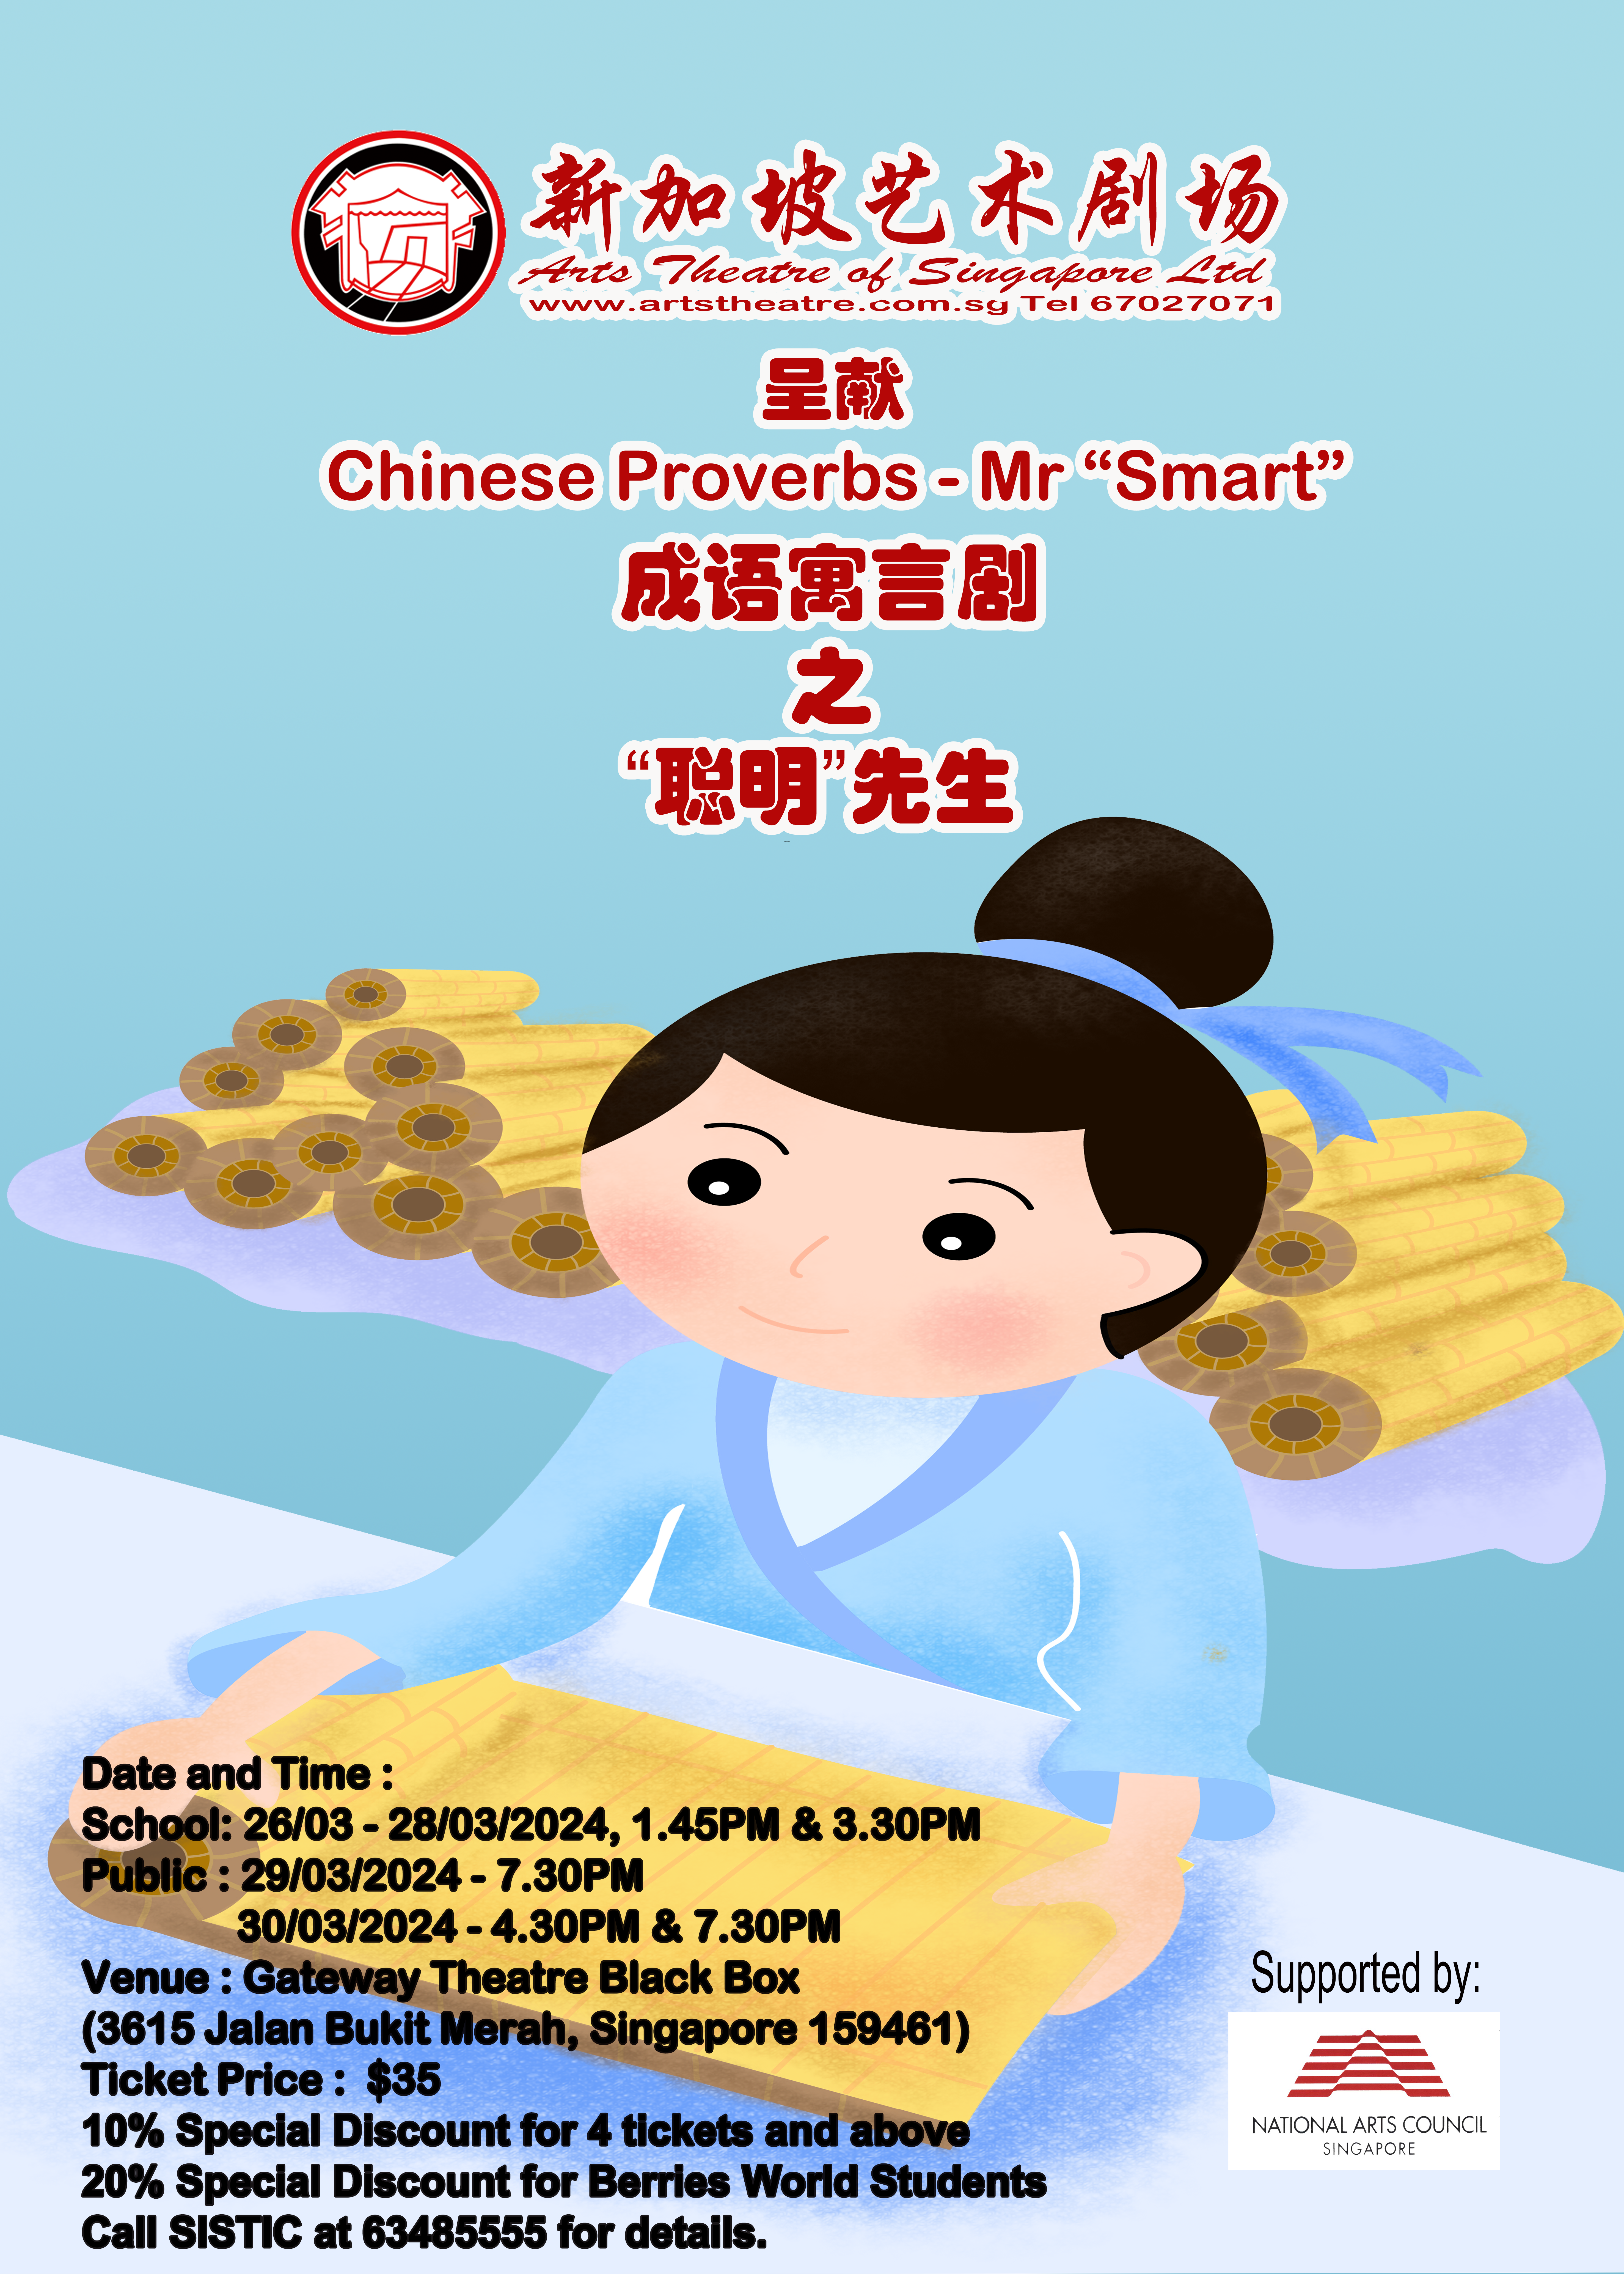 Chinese Proverbs - Mr "Smart"